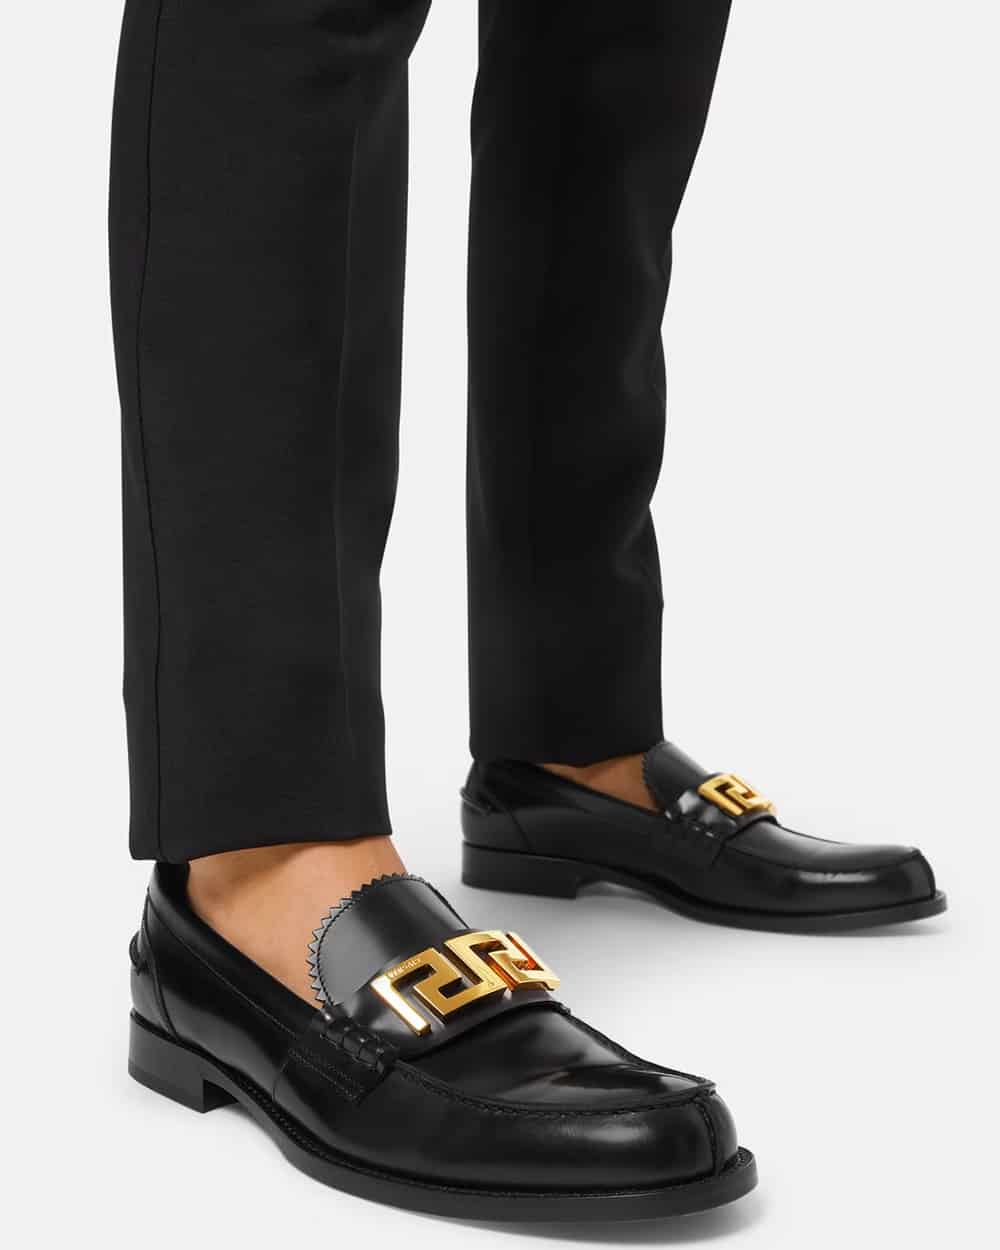 Man wearing black leather Versace loafers with gold metal branding sockless with black pants.